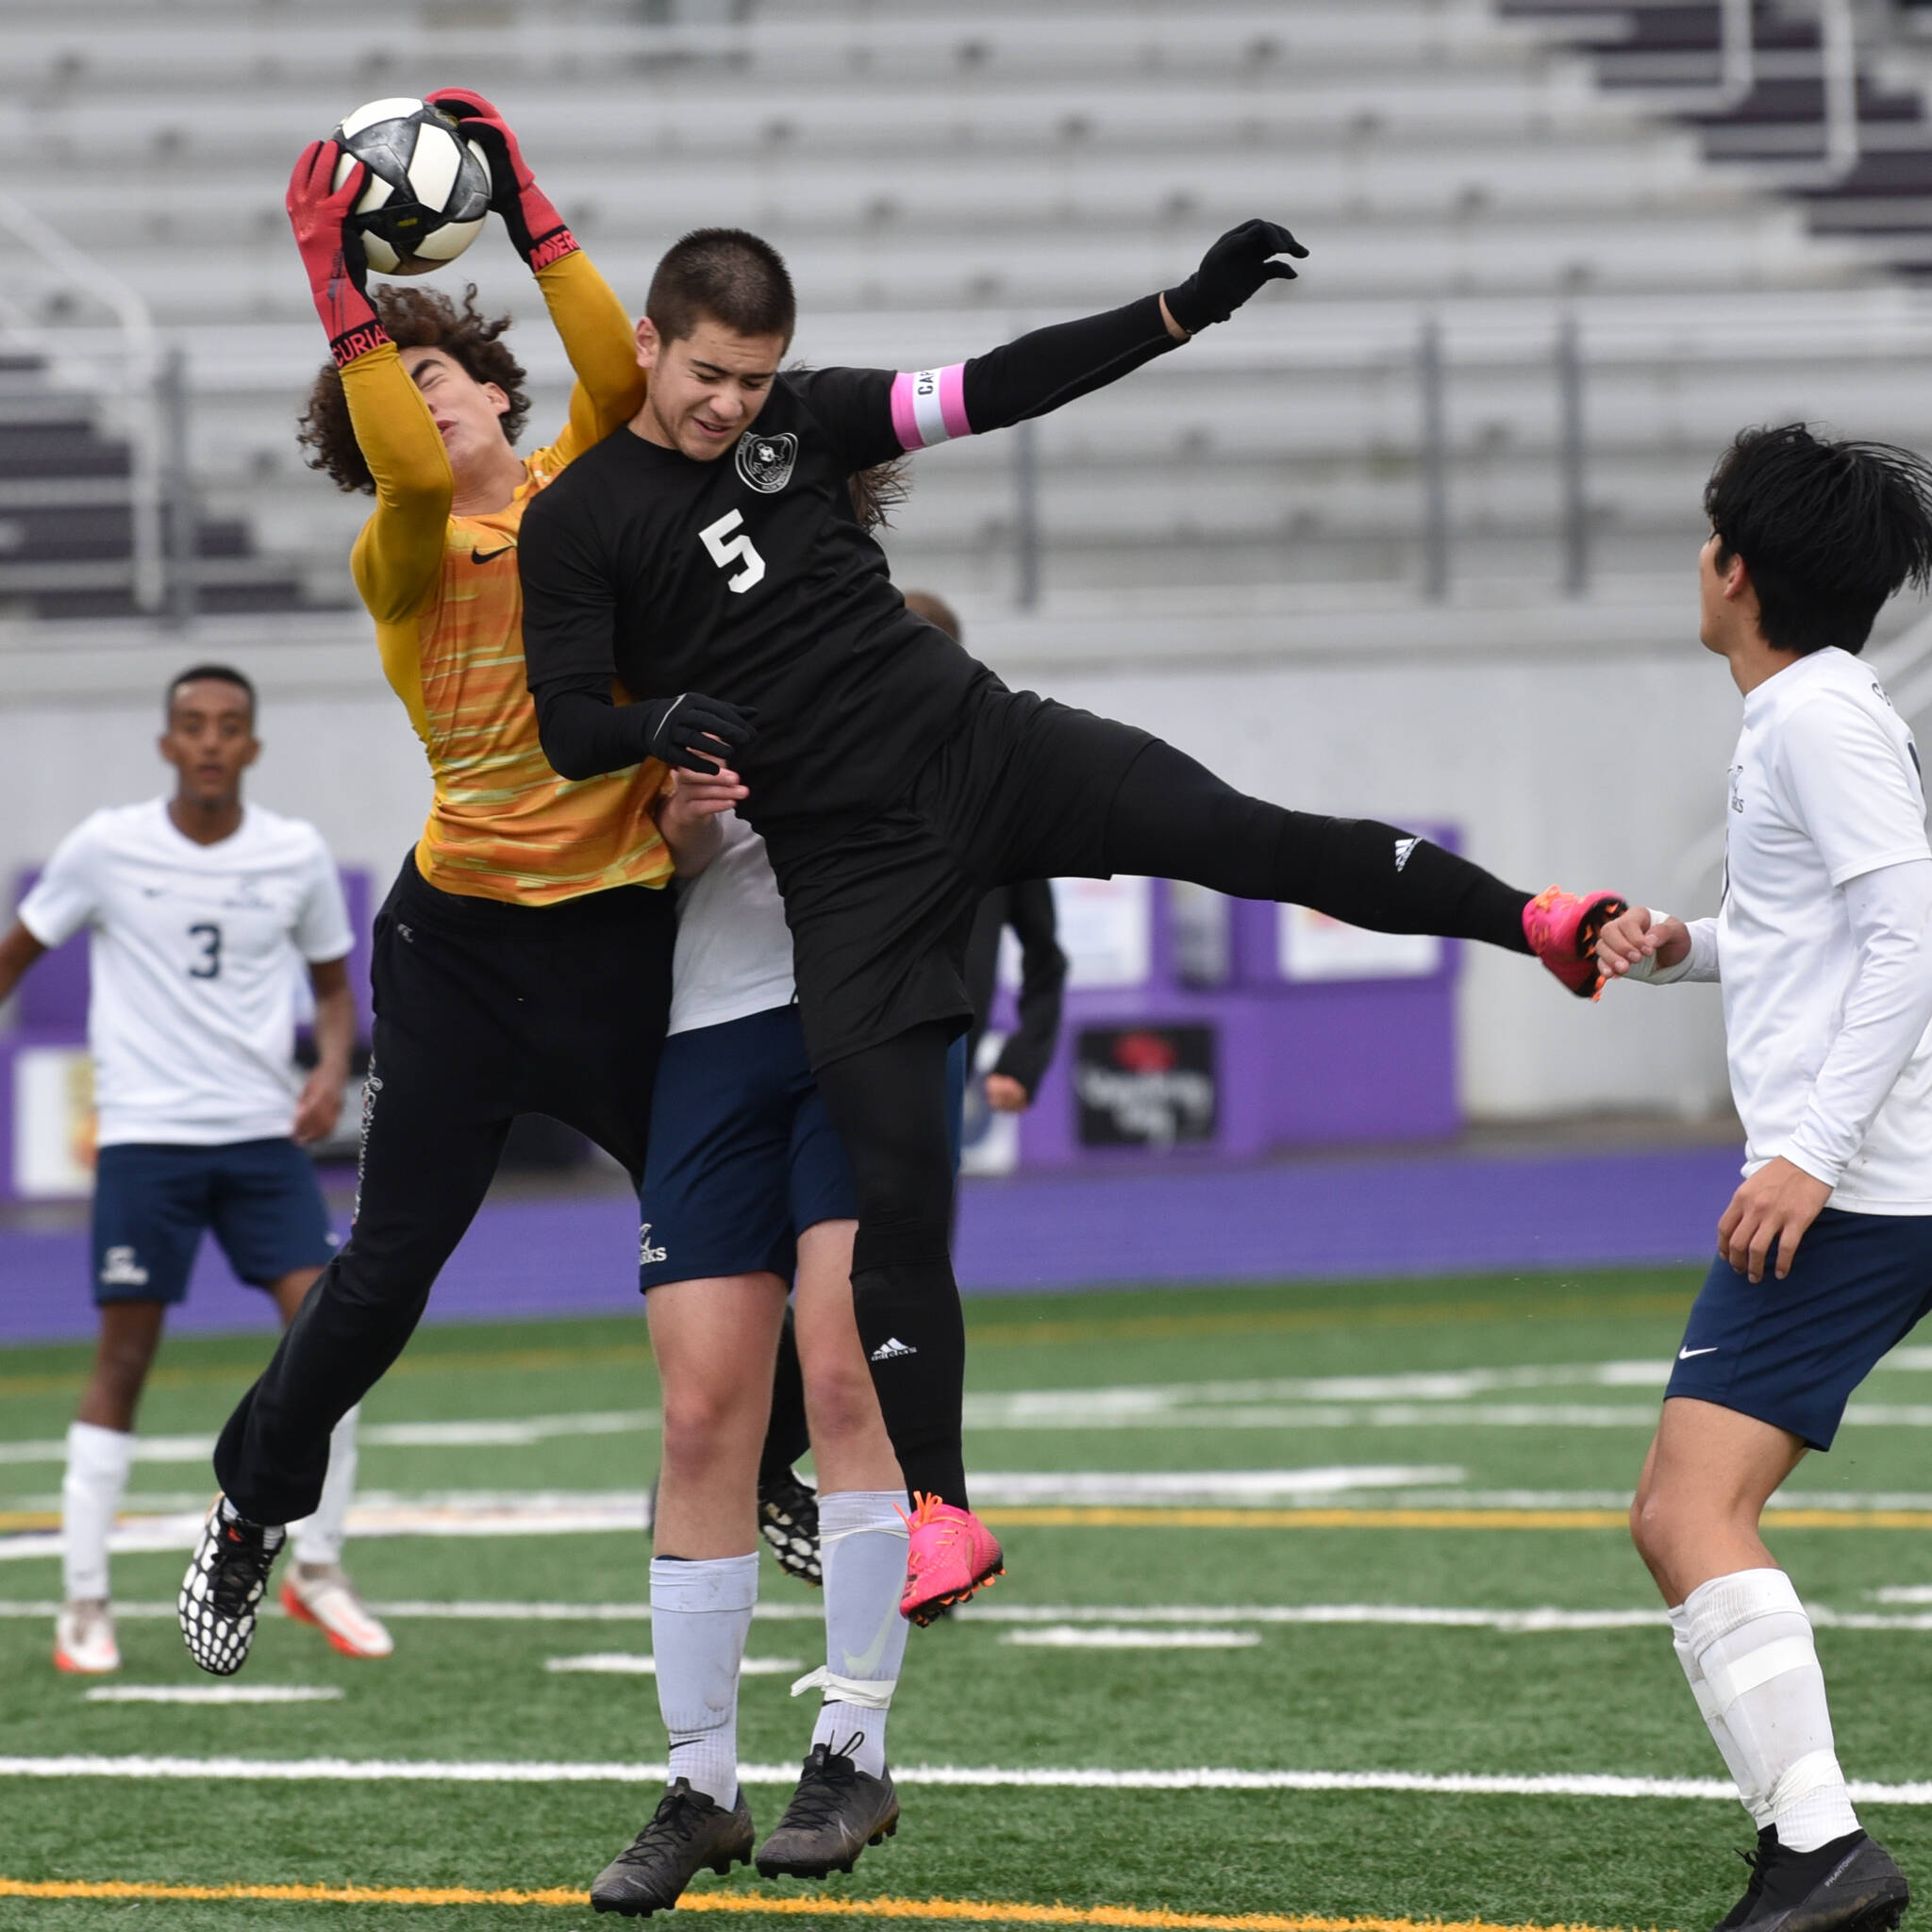 Chris Sutton photo
Junior Co-Captain Diego Lago tries to muscle one in via his hangtime on a header attempt from a corner kick. Friday’s game was nothing short of physical, something the Orcas Vikings have not backed down from this year as a team.